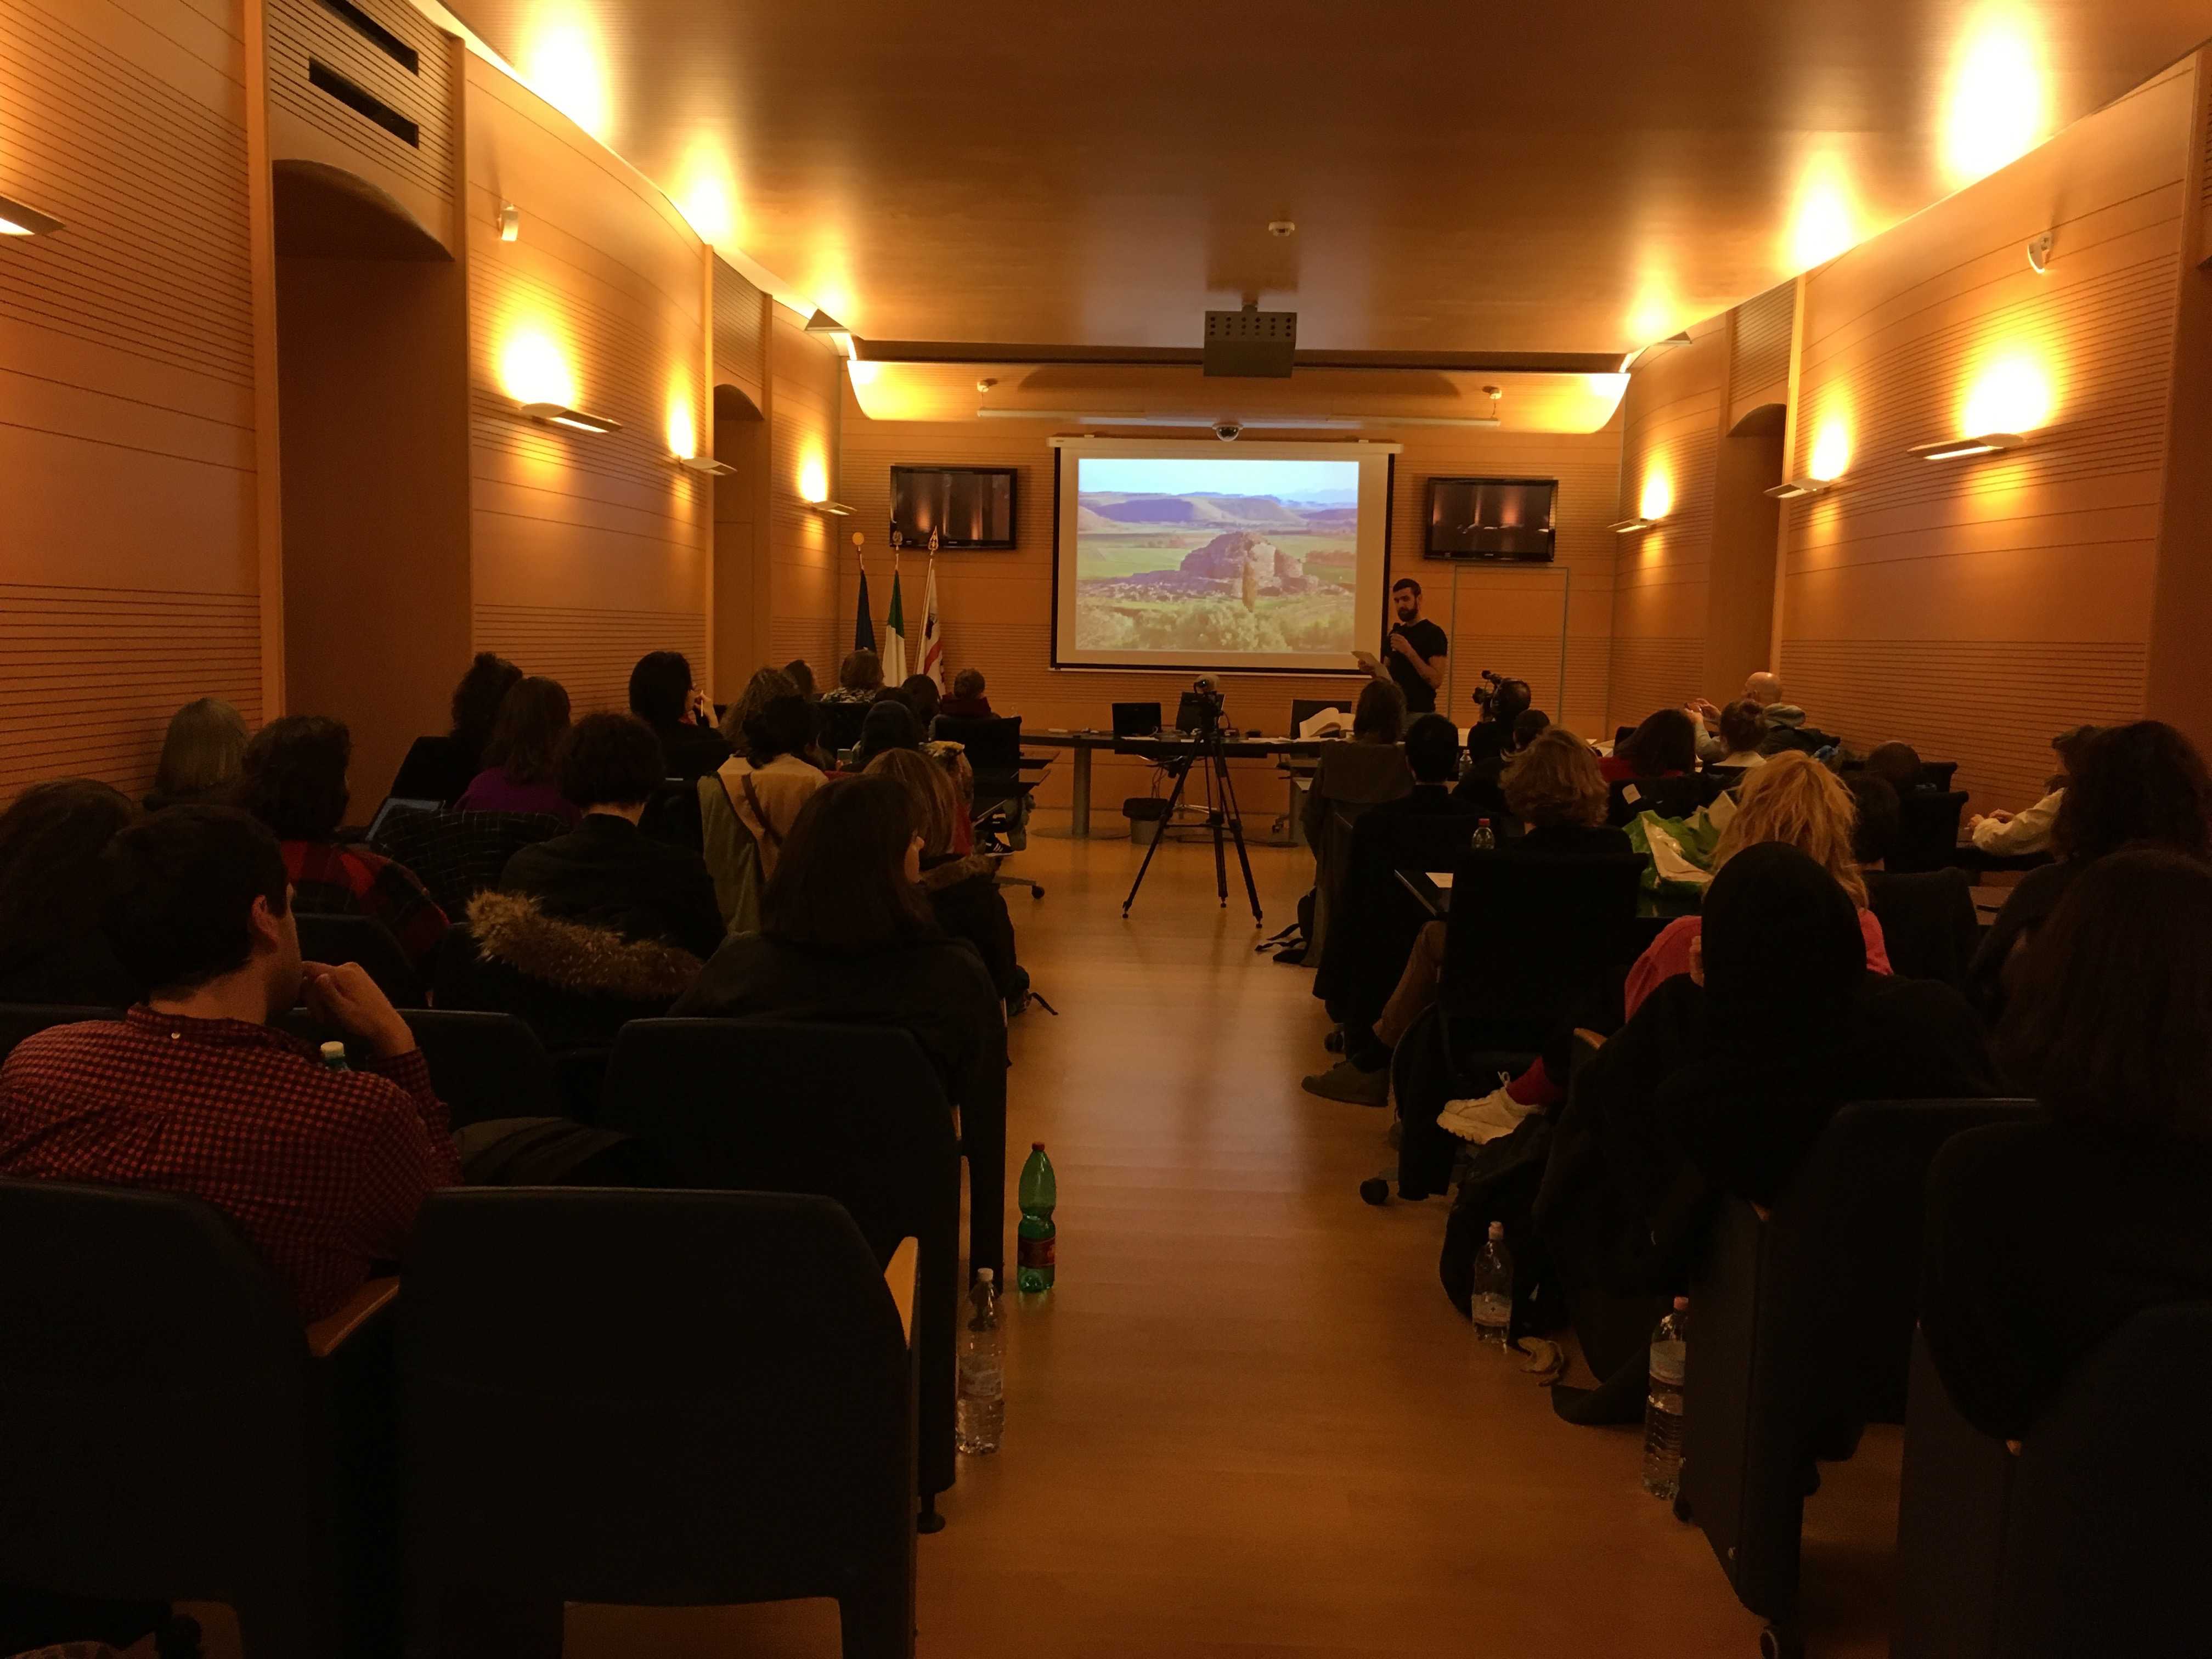 Luca Carboni at Sardinia's State Archive welcoming DAI to Cagliari with a lecture on the history of the island. Photo Credit: Jacqvan der Spek